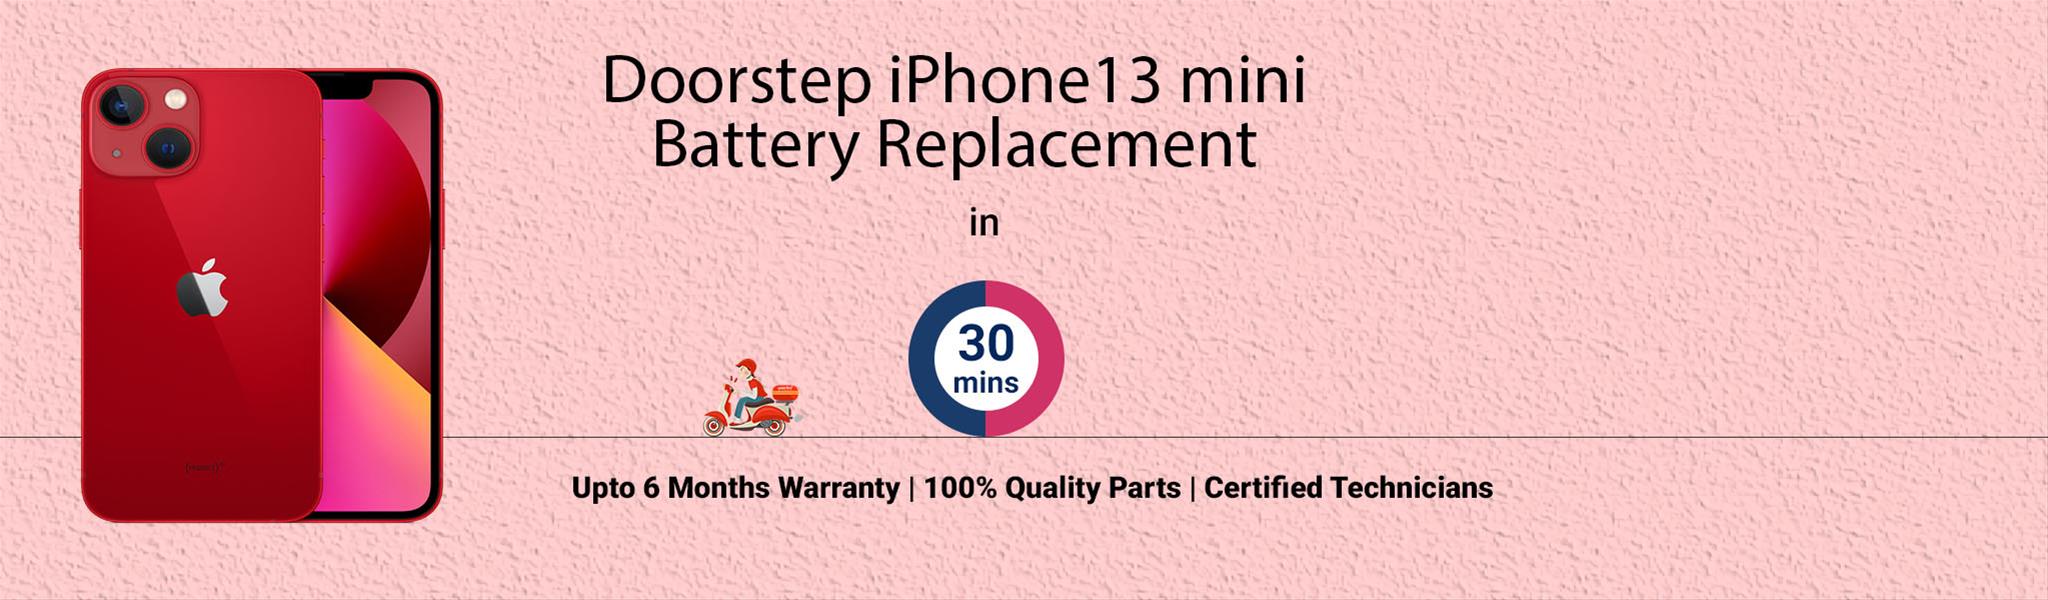 iphone-13-mini-battery-replacement.jpg